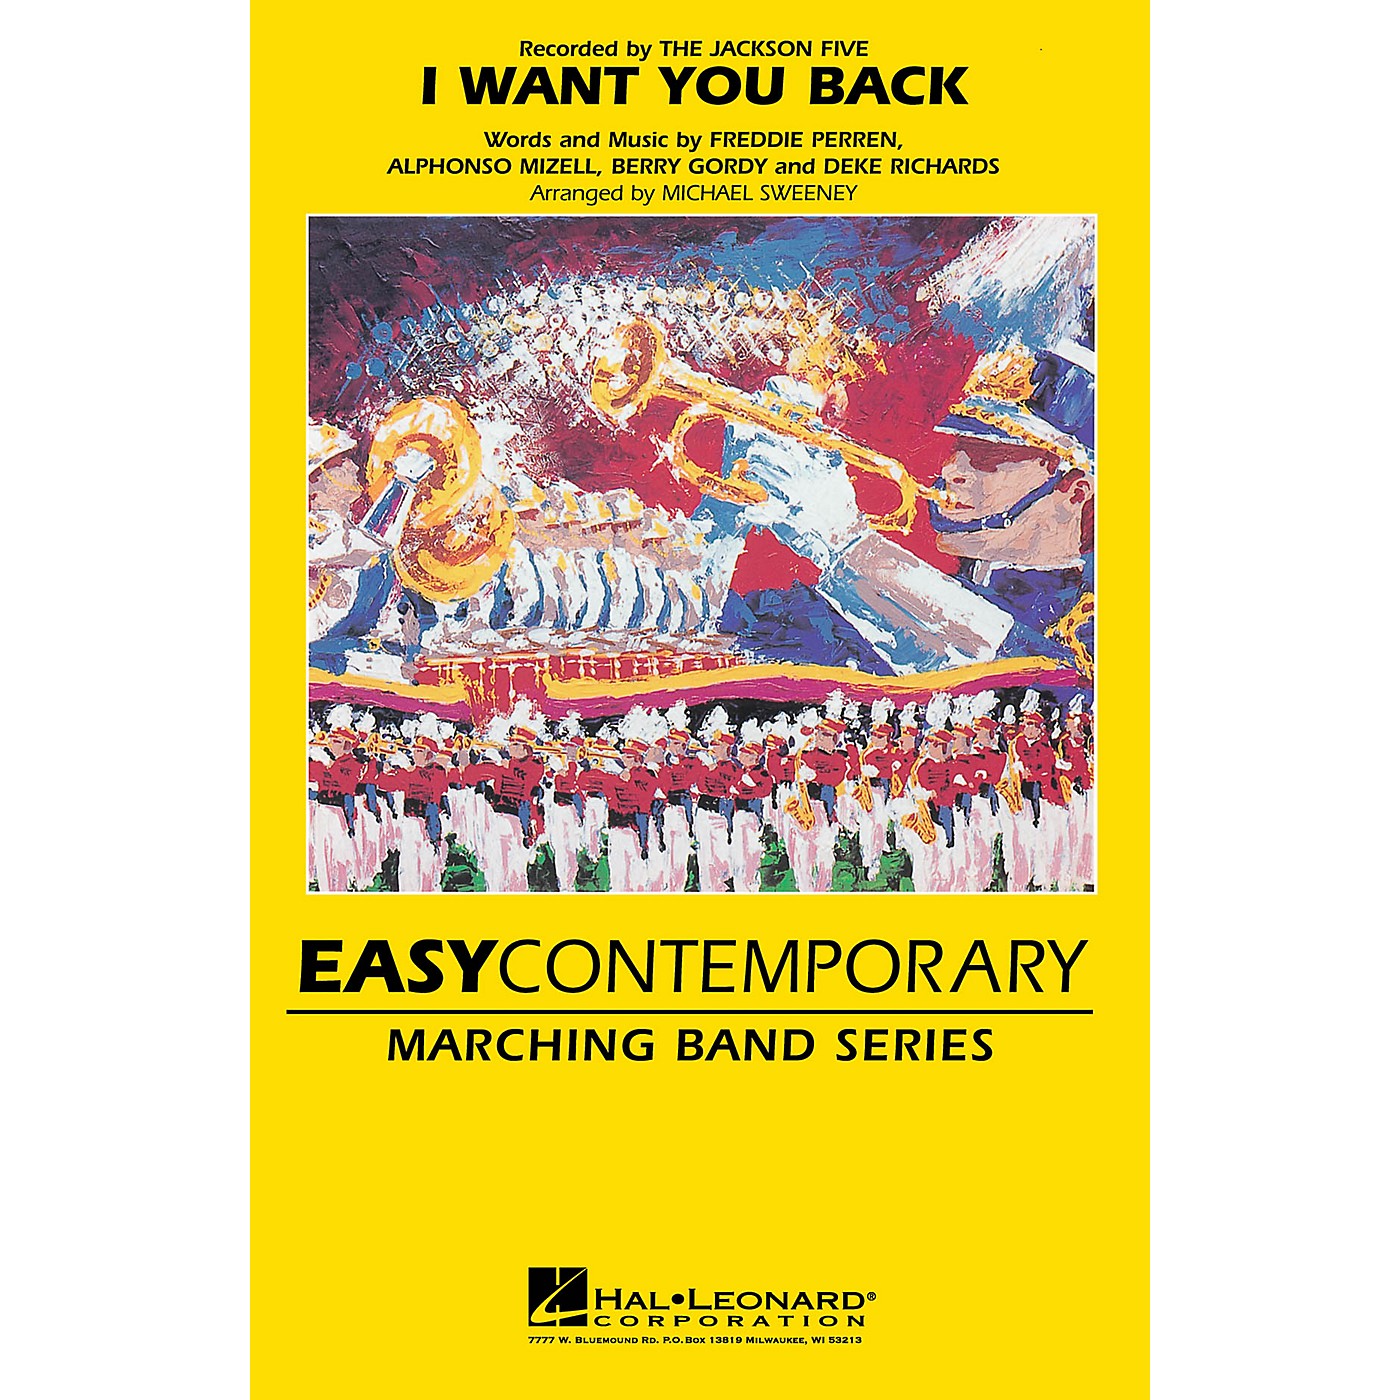 Hal Leonard I Want You Back Marching Band Level 2-3 by The Jackson 5 Arranged by Michael Sweeney thumbnail